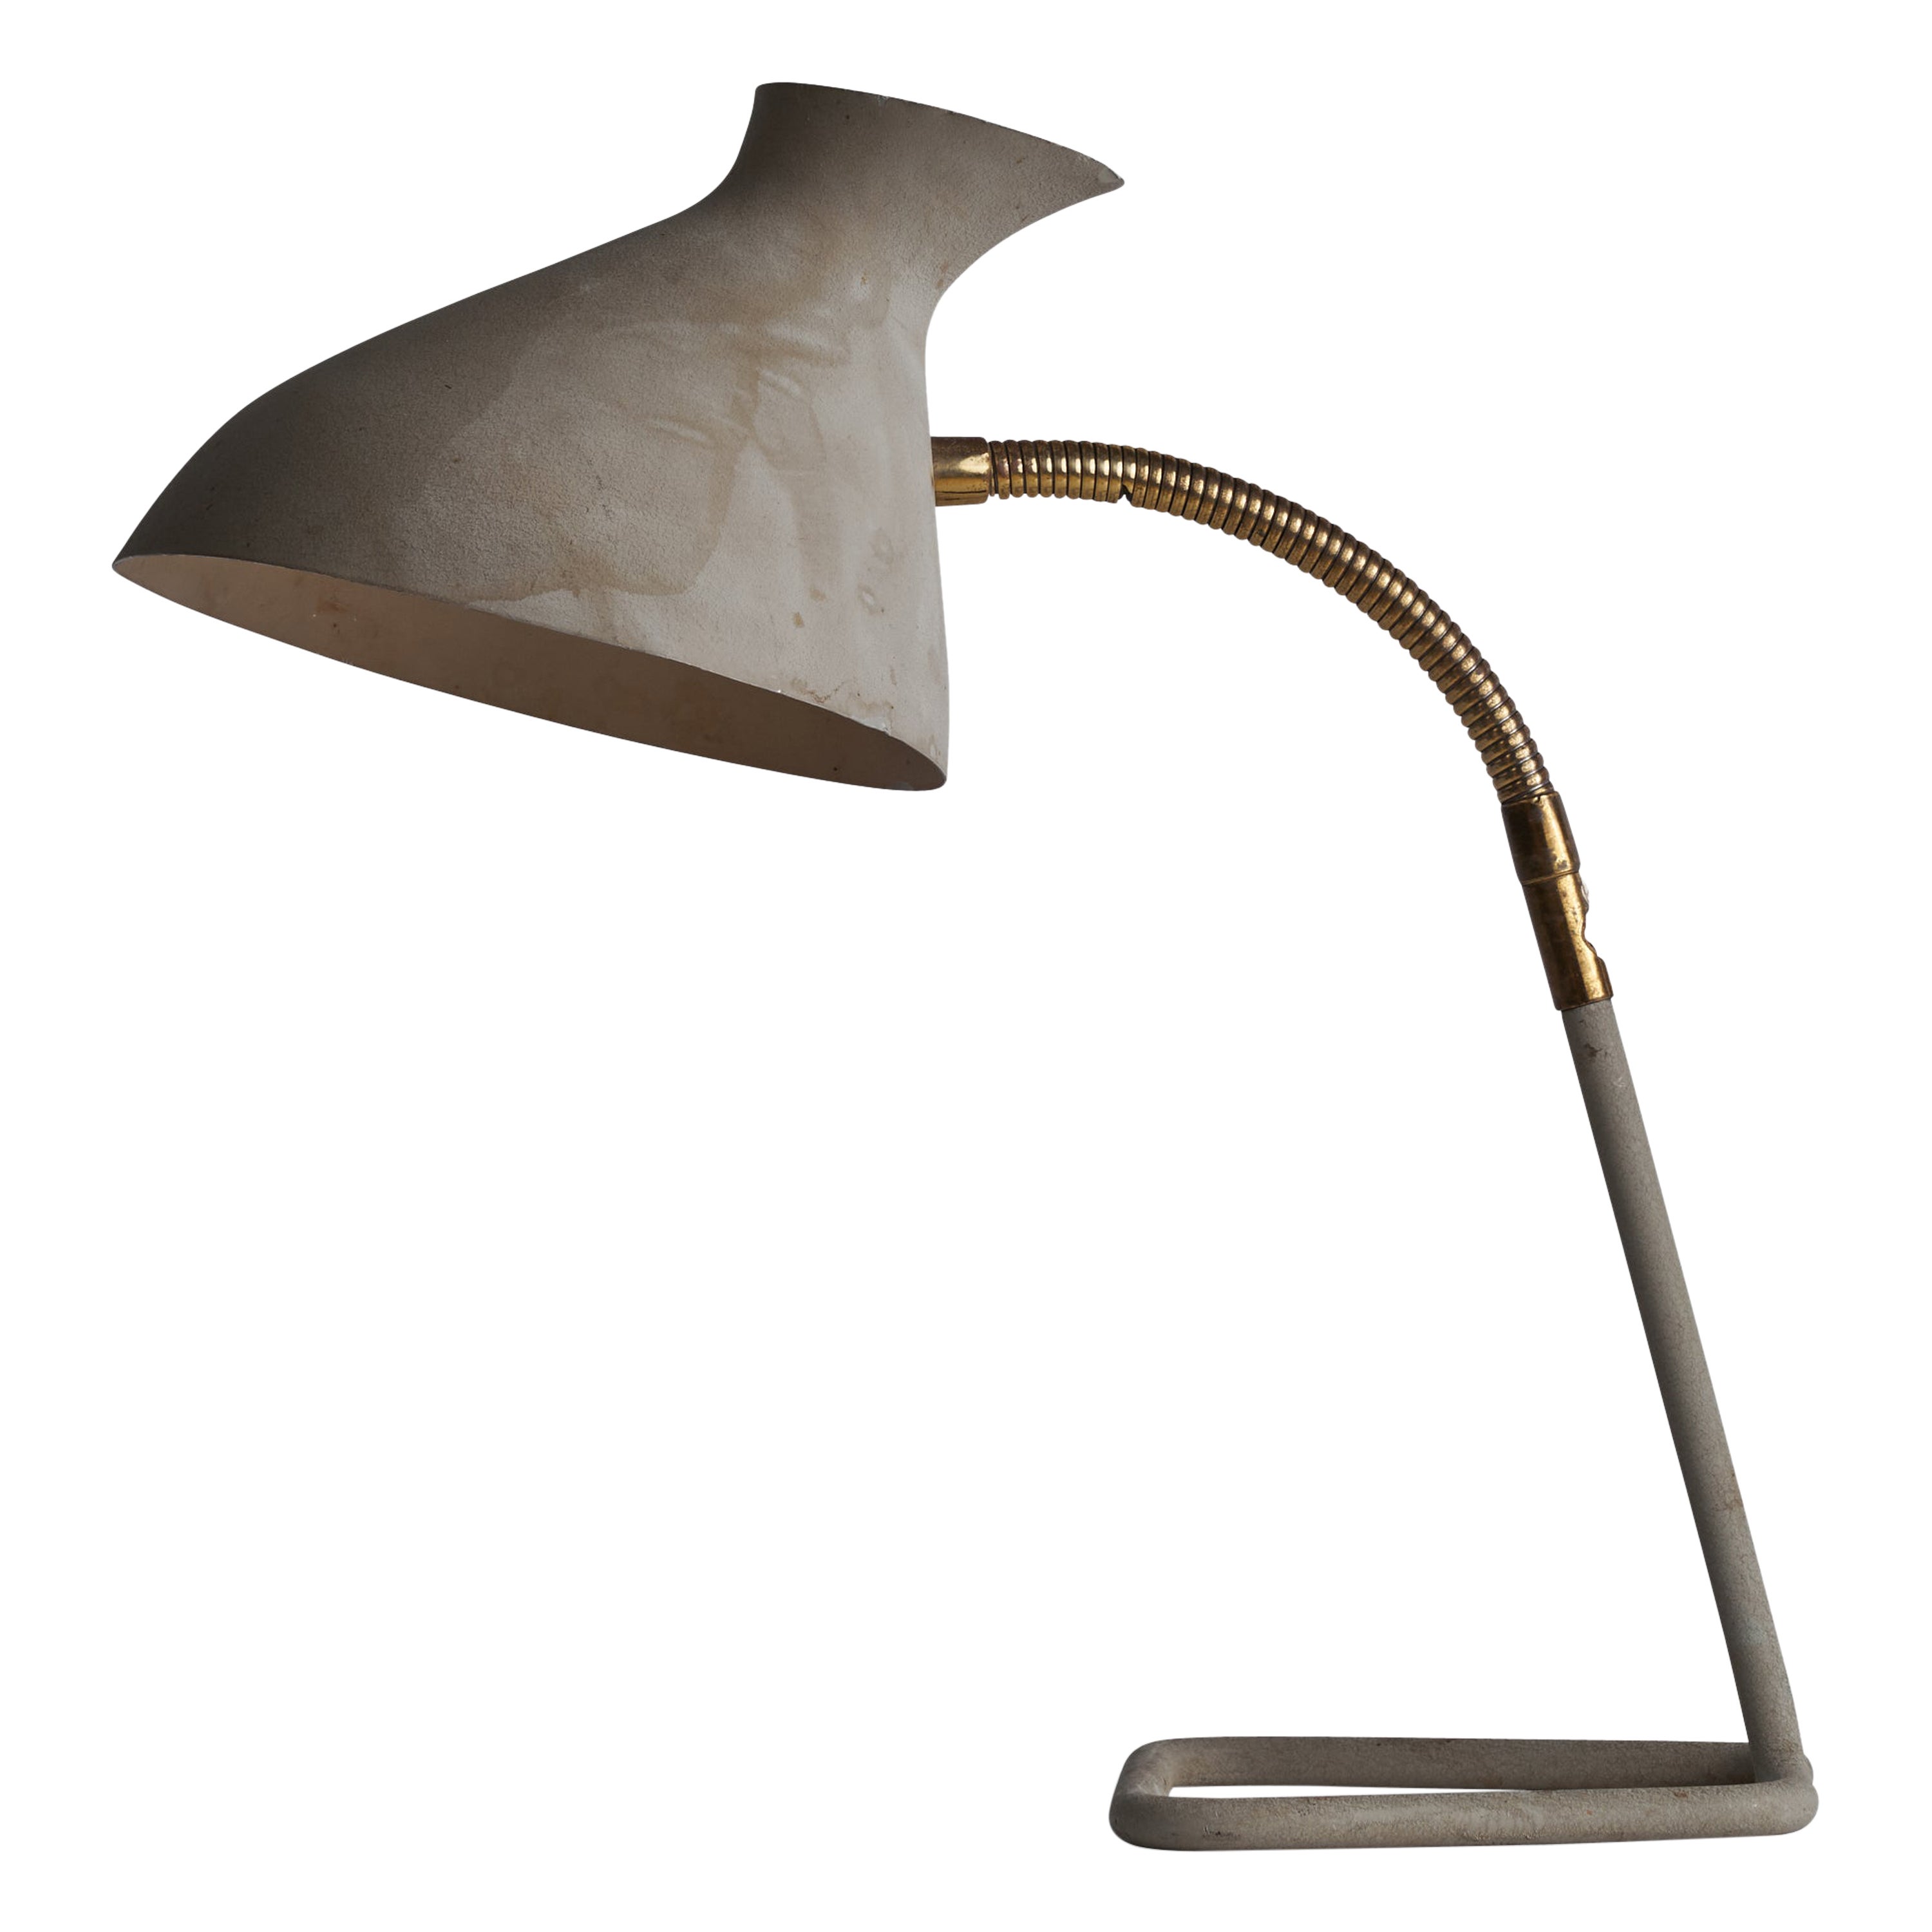 HW Armatur, Table Lamp, Brass, Metal, Iron, Sweden, 1950s For Sale